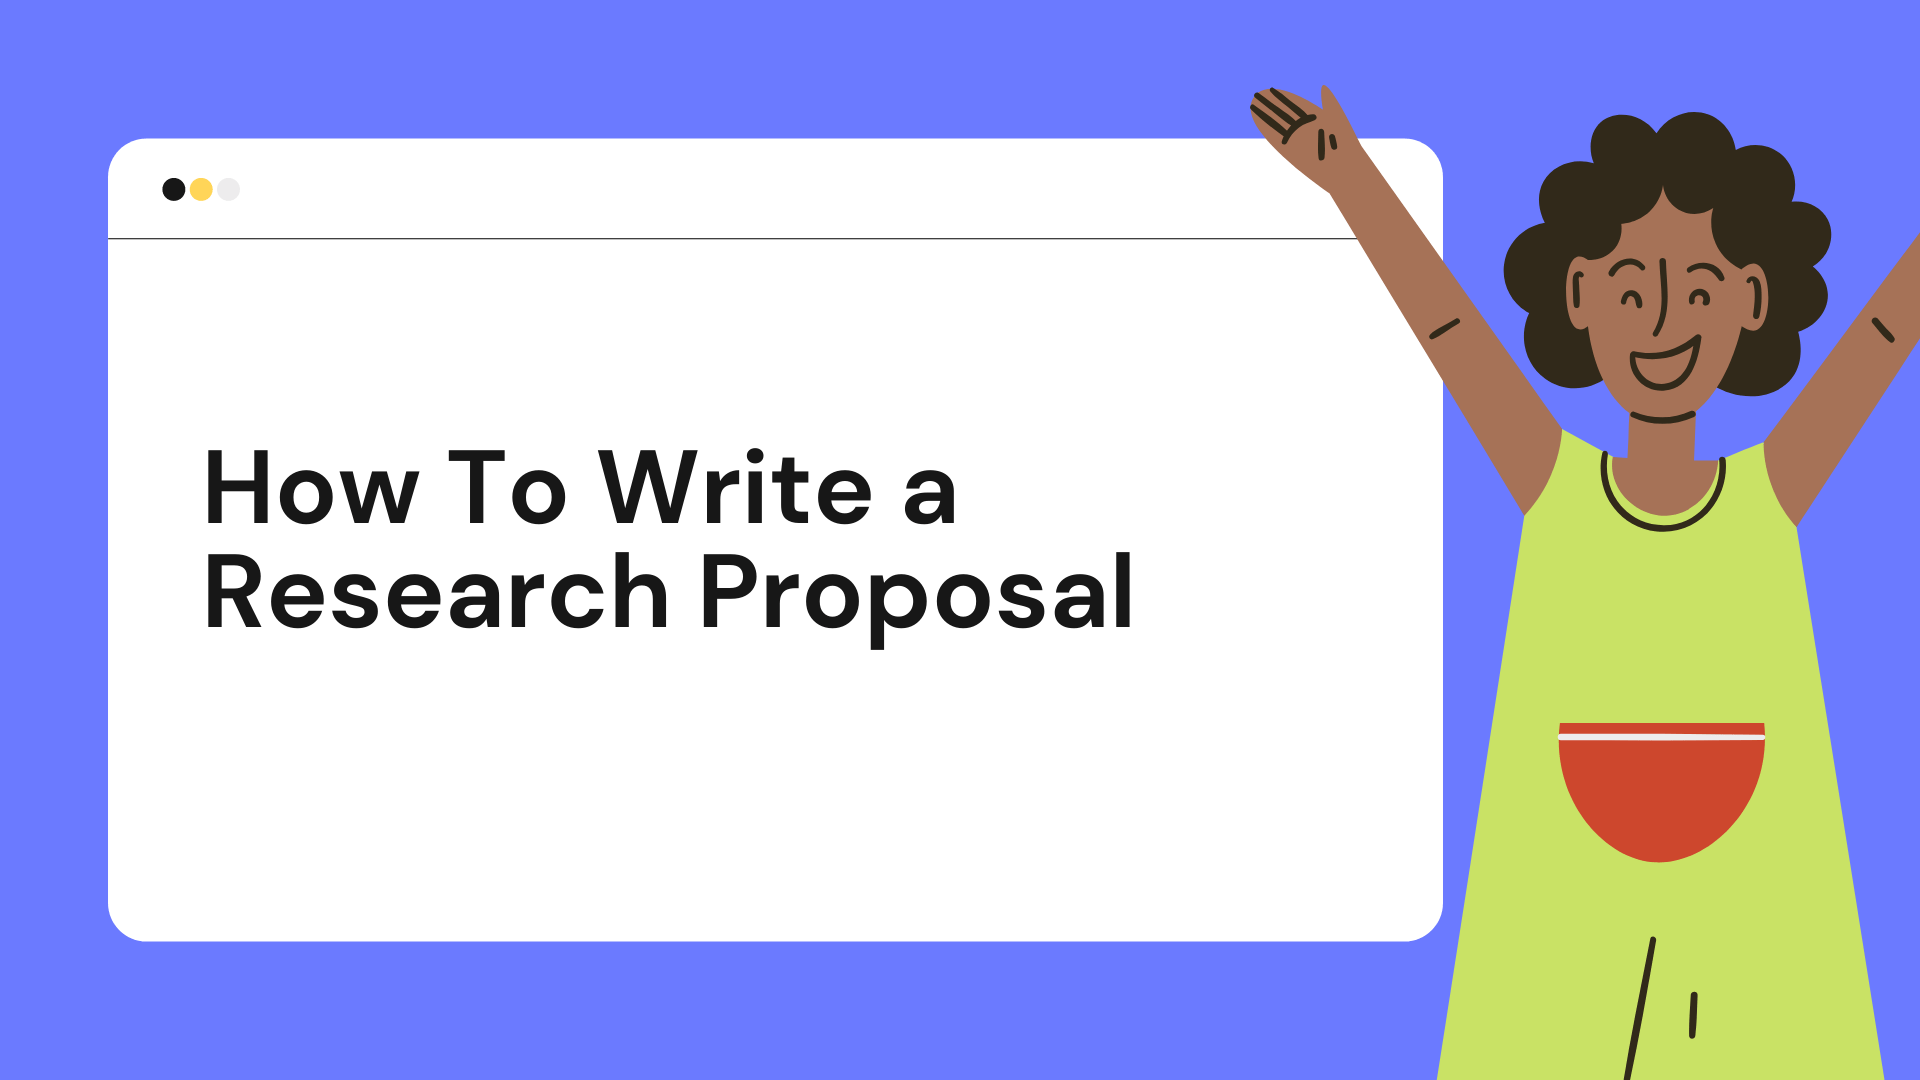 How To Write a Research Proposal